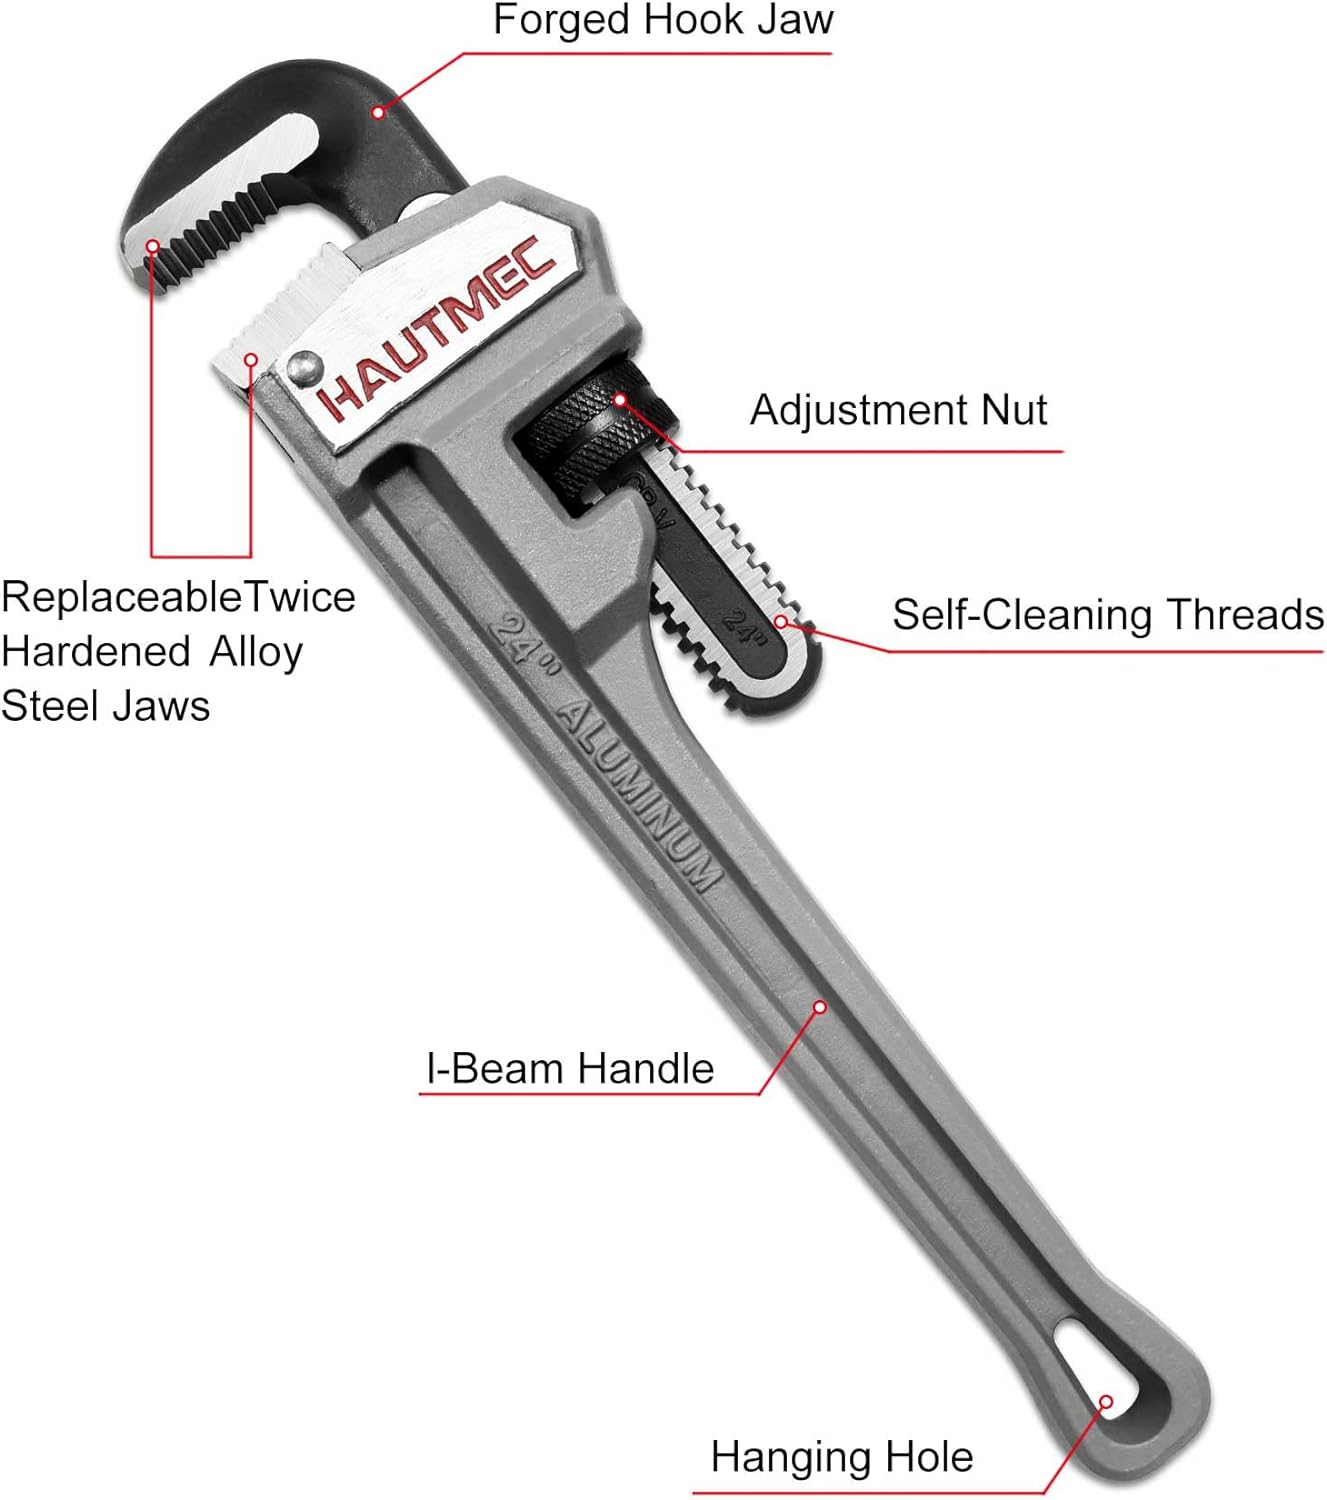 HAUTMEC 24 Inch Heavy Duty Aluminum Straight Pipe Wrench, Adjustable Plumbing Wrench, 3" Jaw Capacity, for Pipes, Tees, Ball Valves and Other Objects HT0187-PW